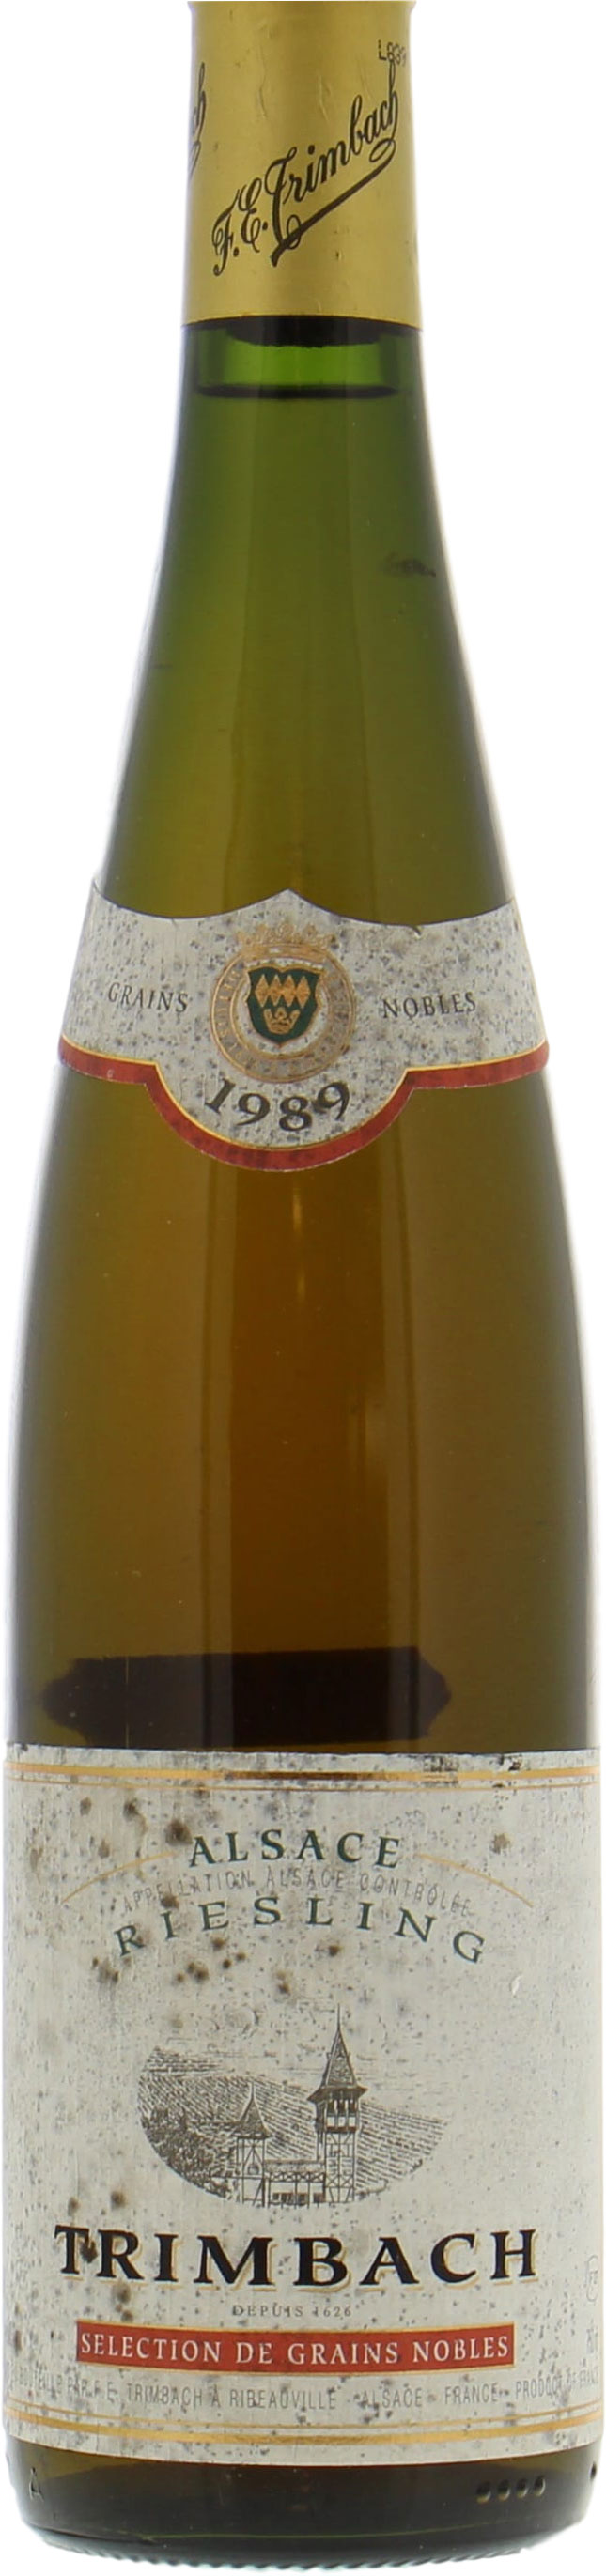 Trimbach - Riesling Cuvee Frederic Emile Selection Grains Nobles 1989